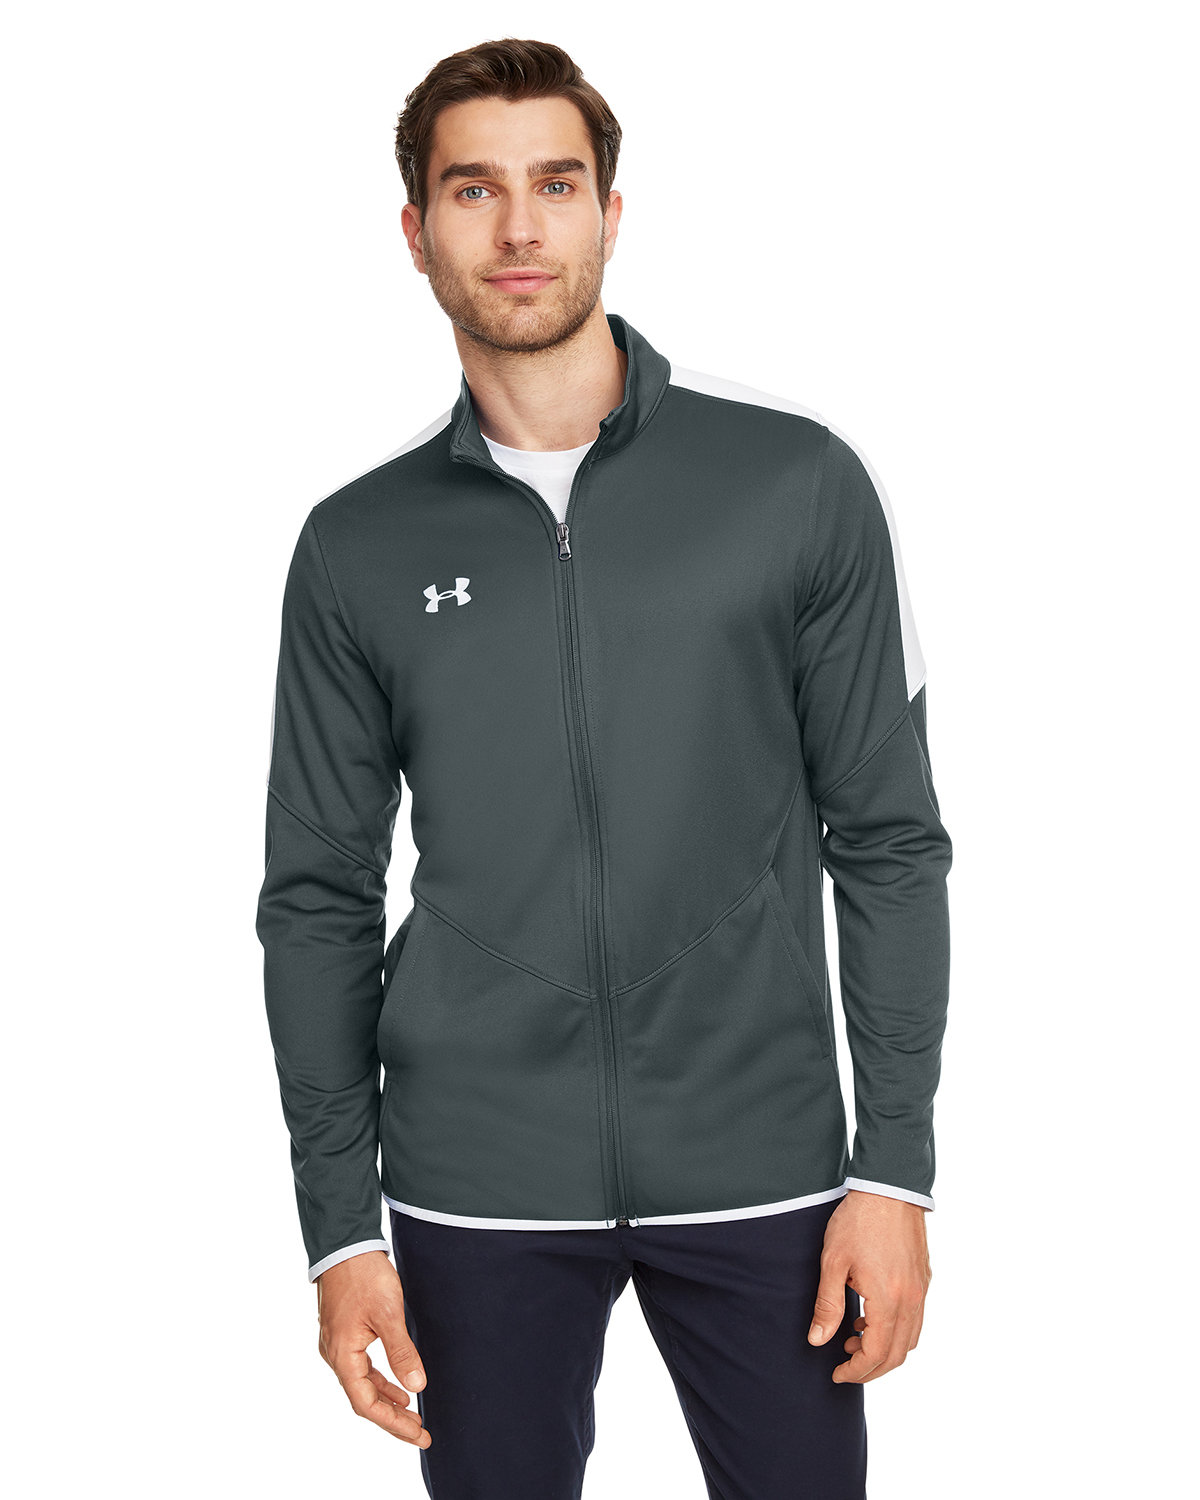 E008 1326761 Under Armour Mens Rival Knit Jacket